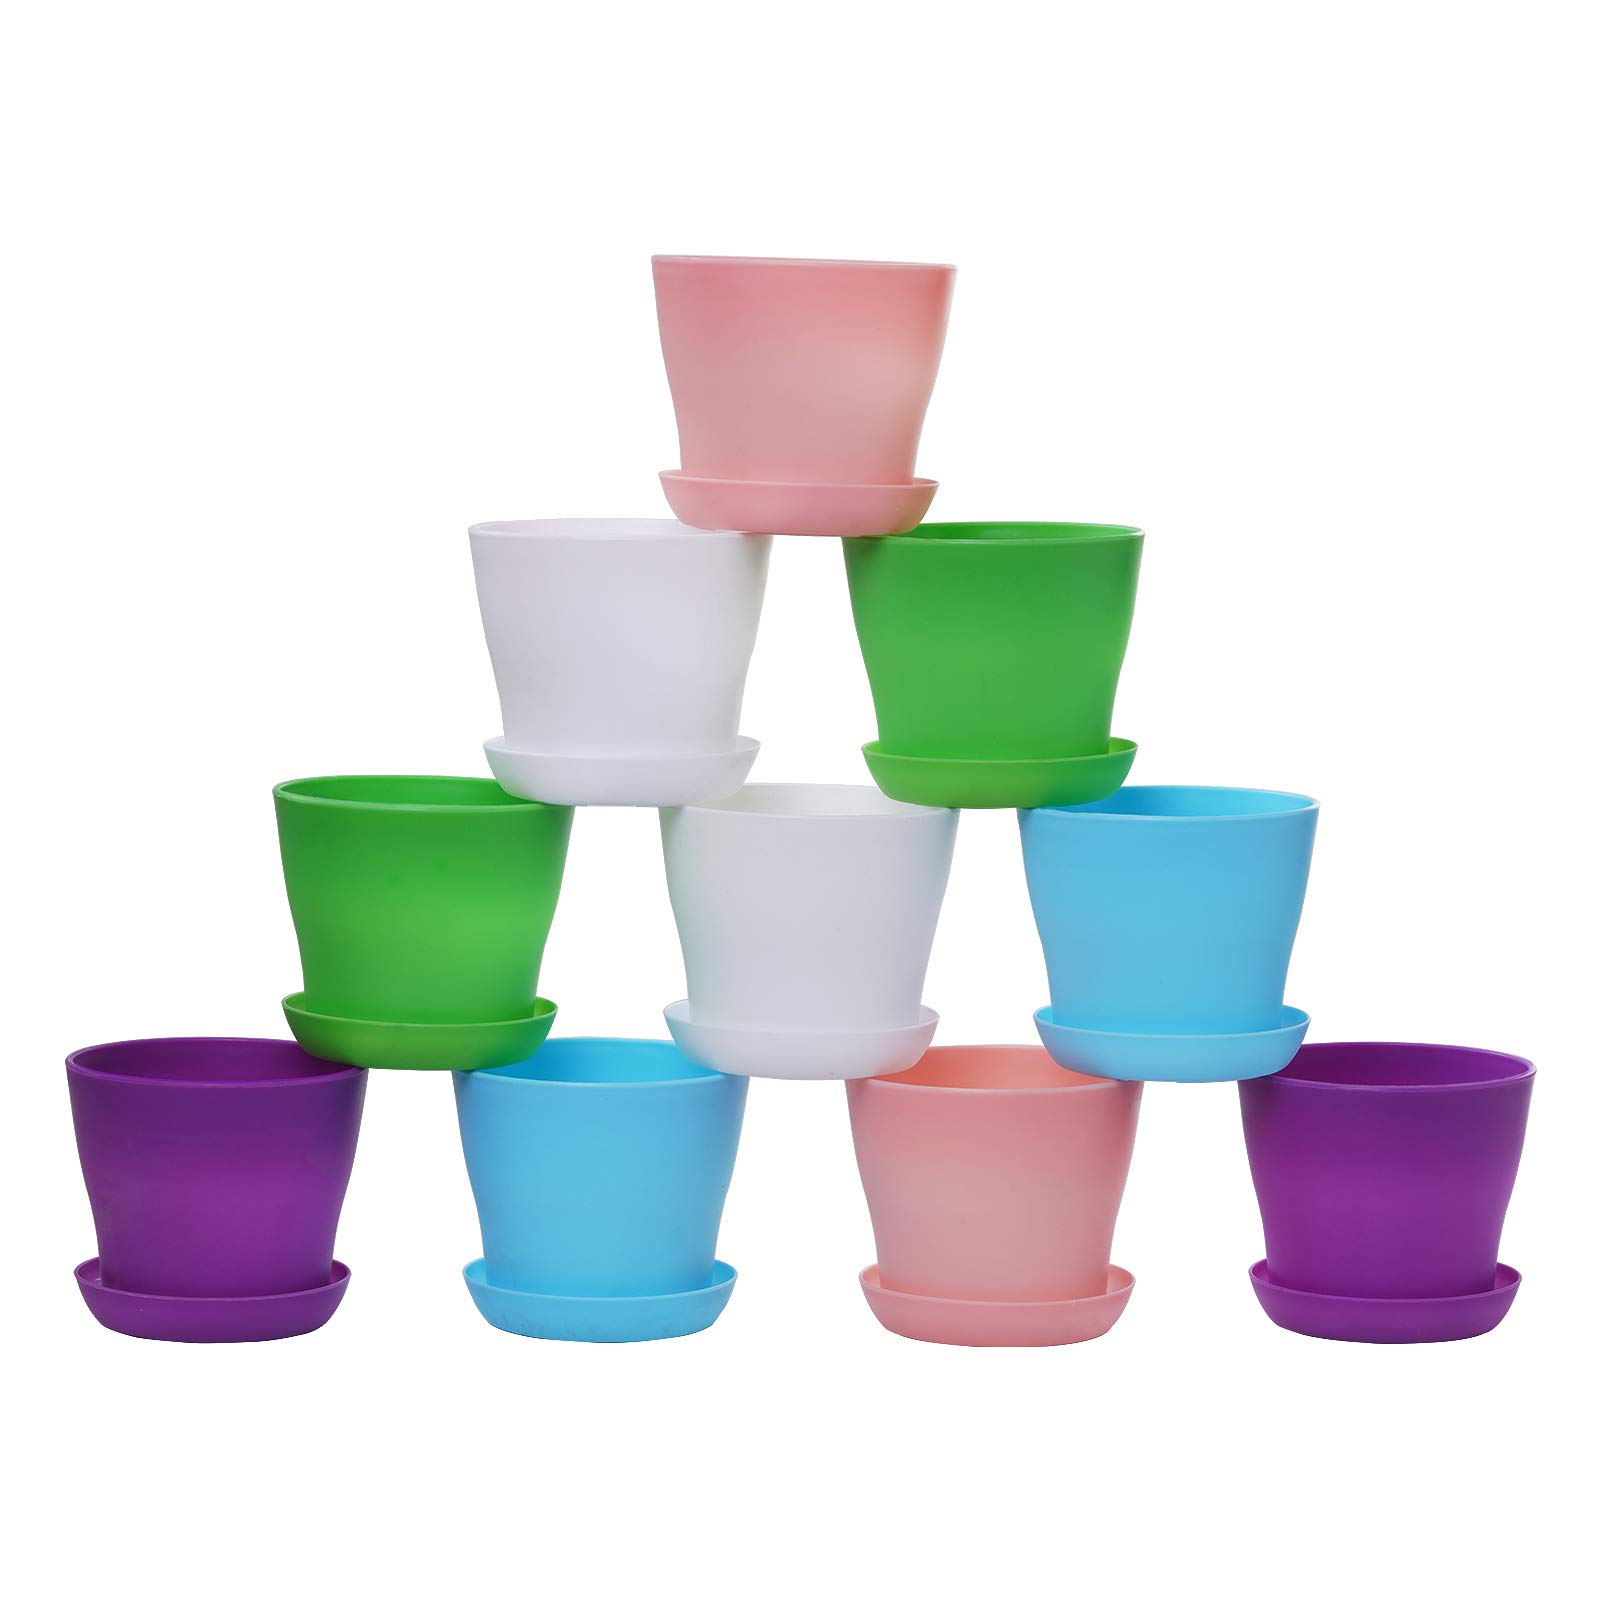 TDHDIKE 10 Pcs Plastic Planters Indoor Pots, Mini Flower Seedlings Nursery Flower Pot with Pallet, Modern Decorative Gardening Containers